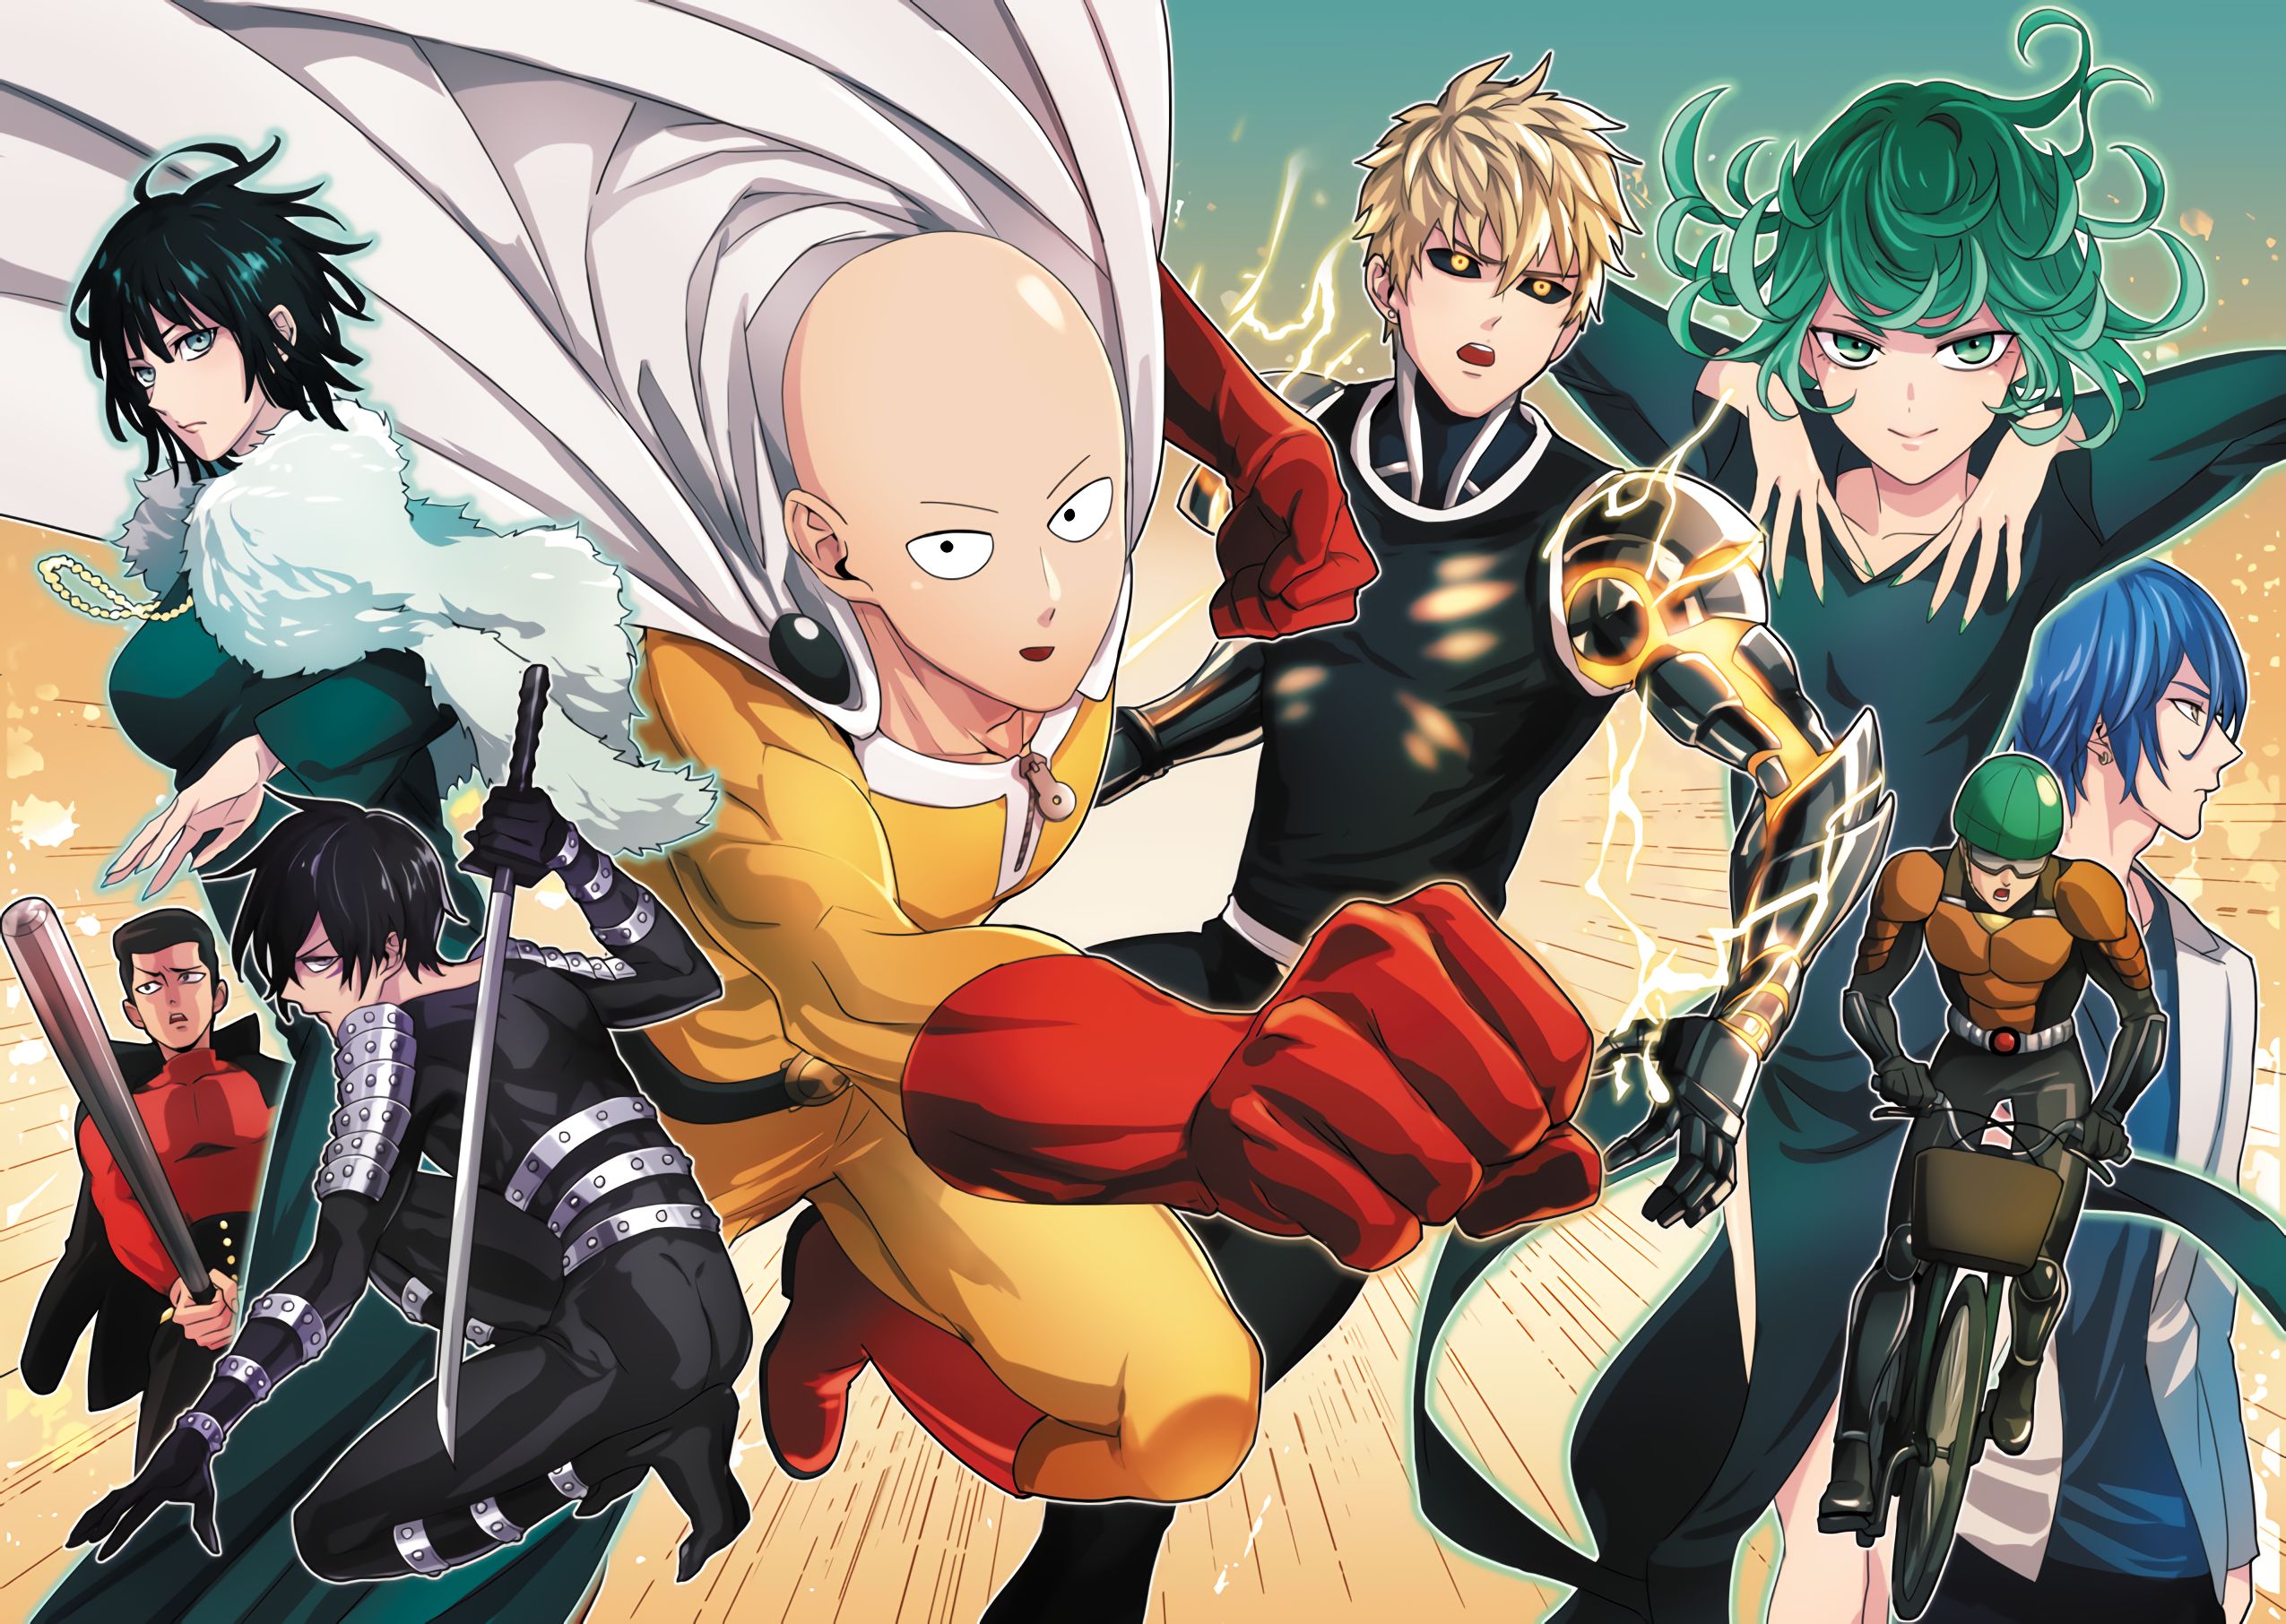 one punch man, saitama (one punch man), sonic (one punch man), anime, fubuki (one punch man), genos (one punch man), metal bat (one punch man), mumen rider, sweet mask (one punch man), tatsumaki (one punch man) wallpaper for mobile